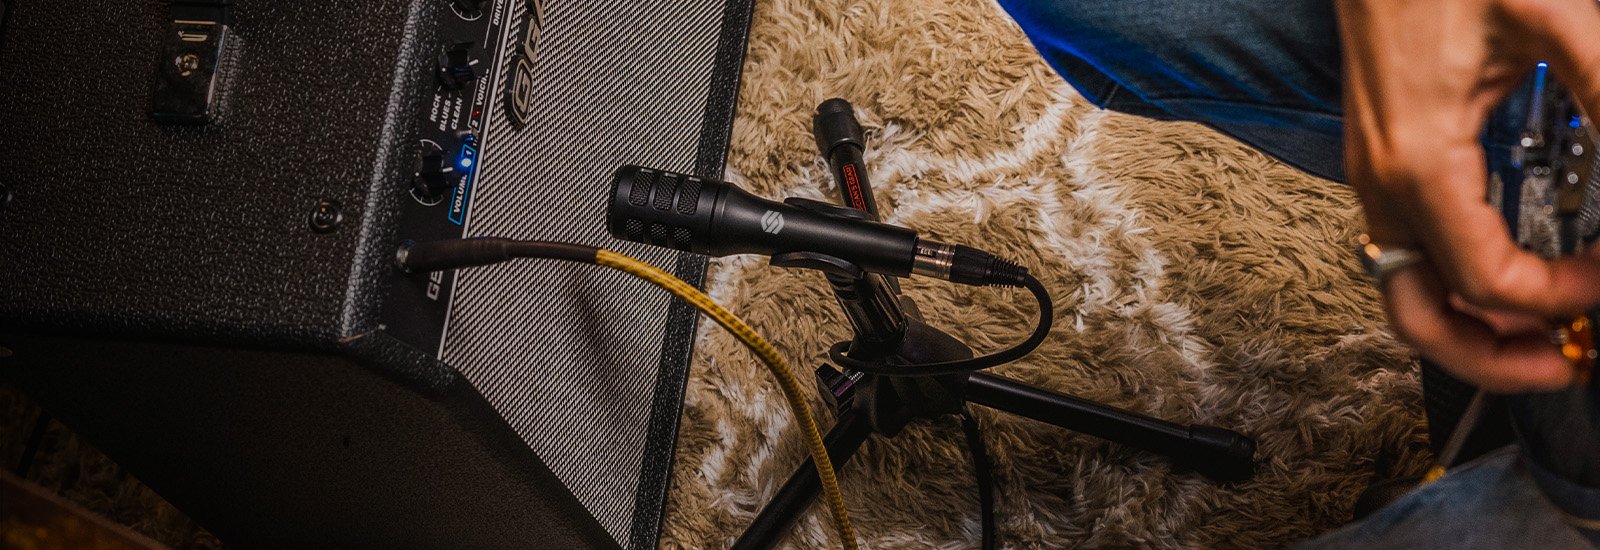 Sterling P10 instrument microphone in studio with amplifier and guitarist.